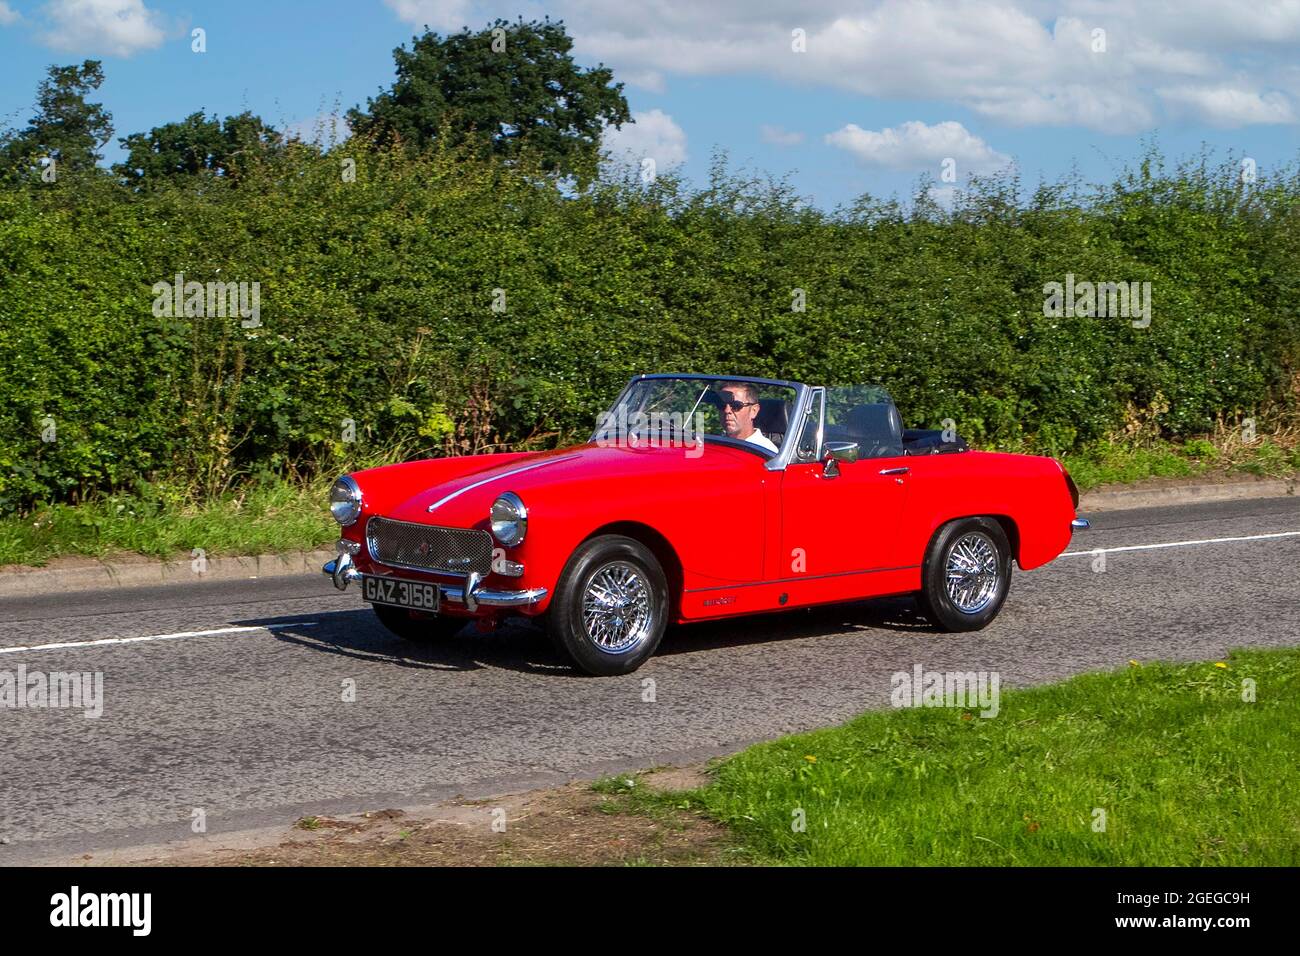 A front view of a Red MG Midget 1500 Petrol convertible roof down vintage classic car retro driver vehicle automobile Stock Photo